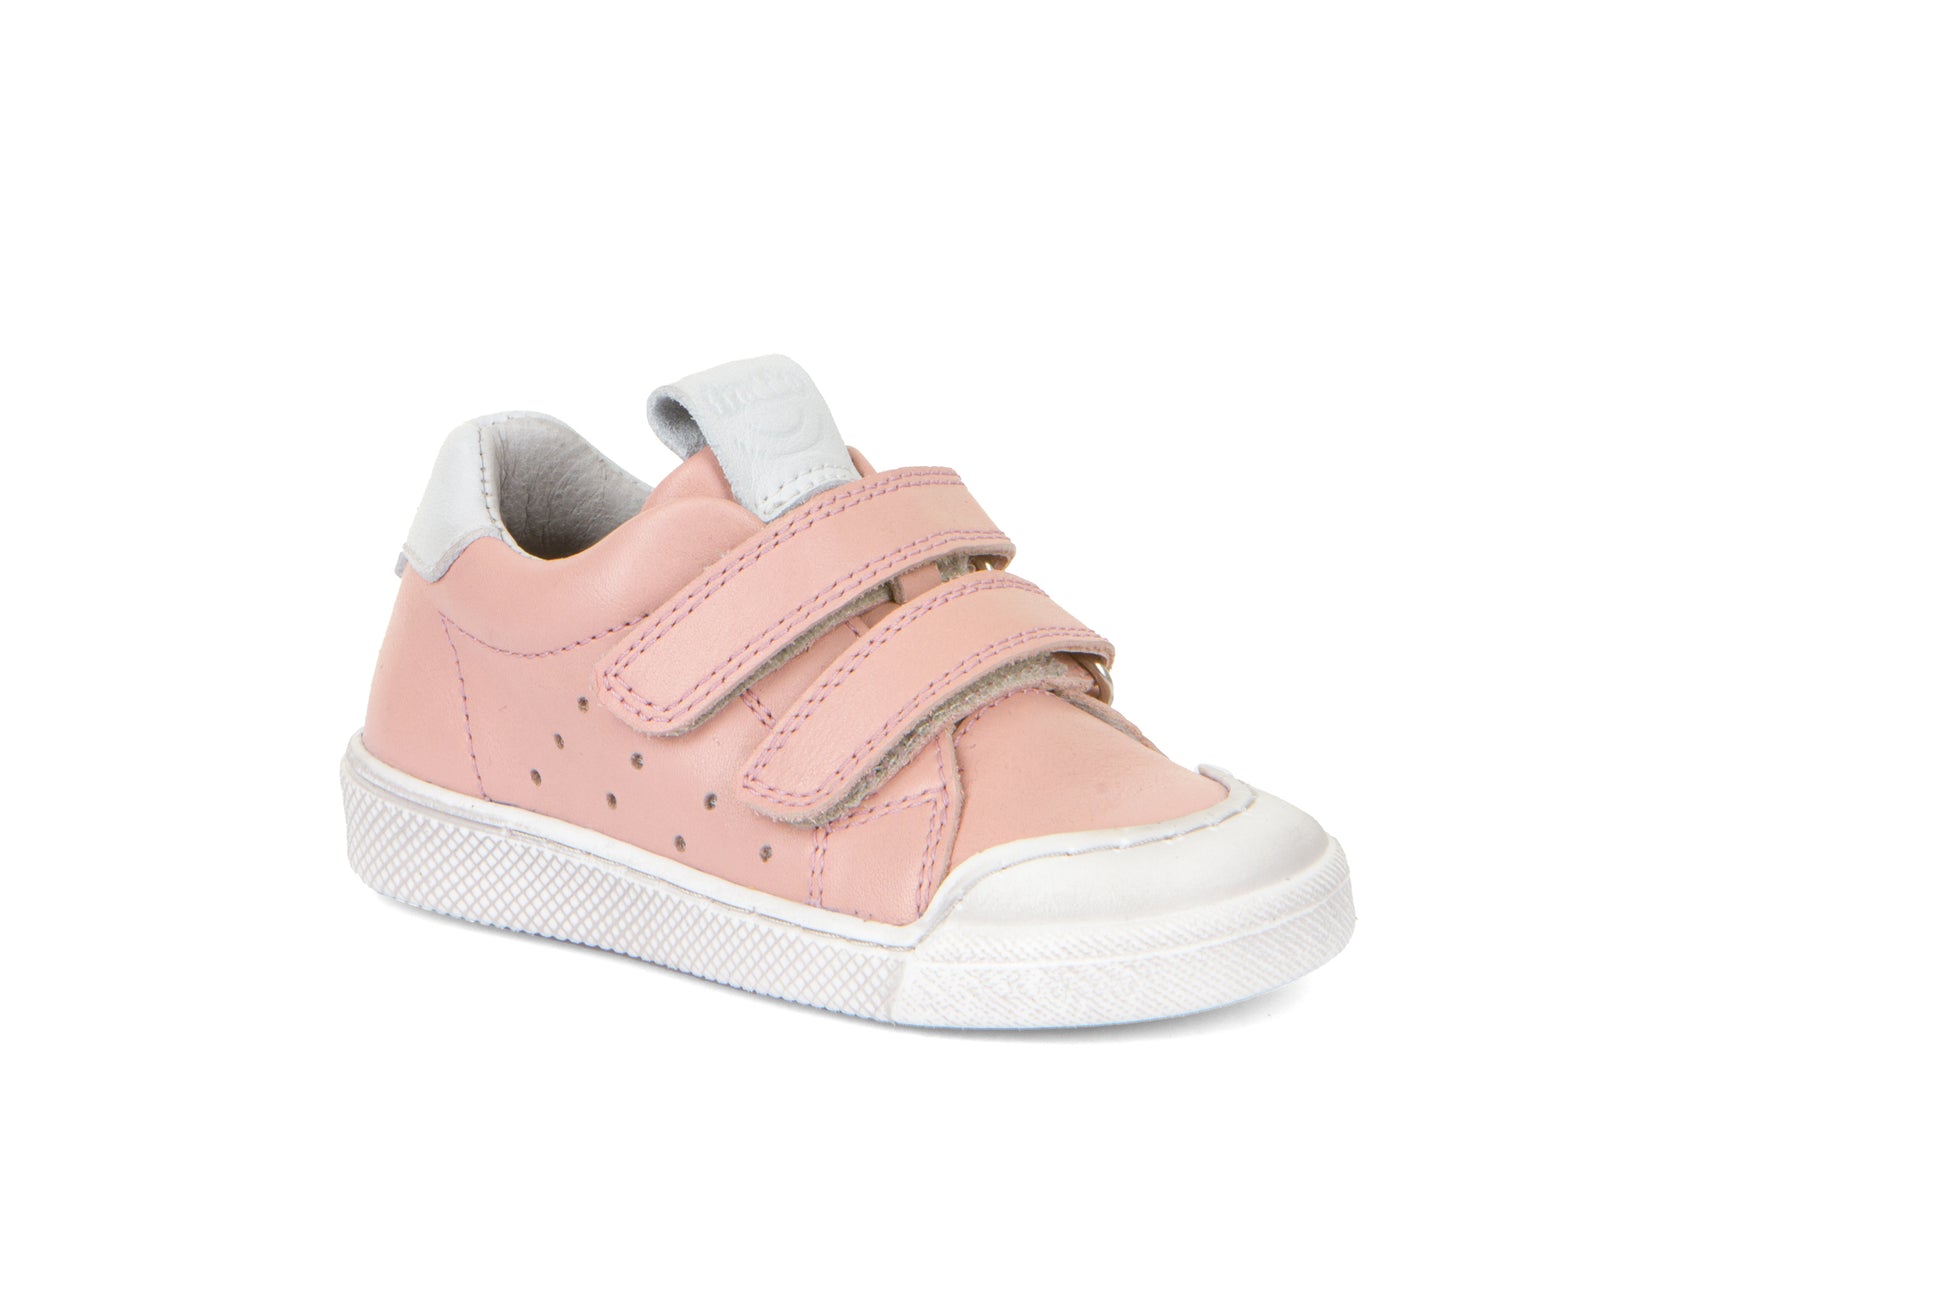 A girls casual shoe by Froddo, style G2130290-4 Rosario, in pink with white trim. Angled view.